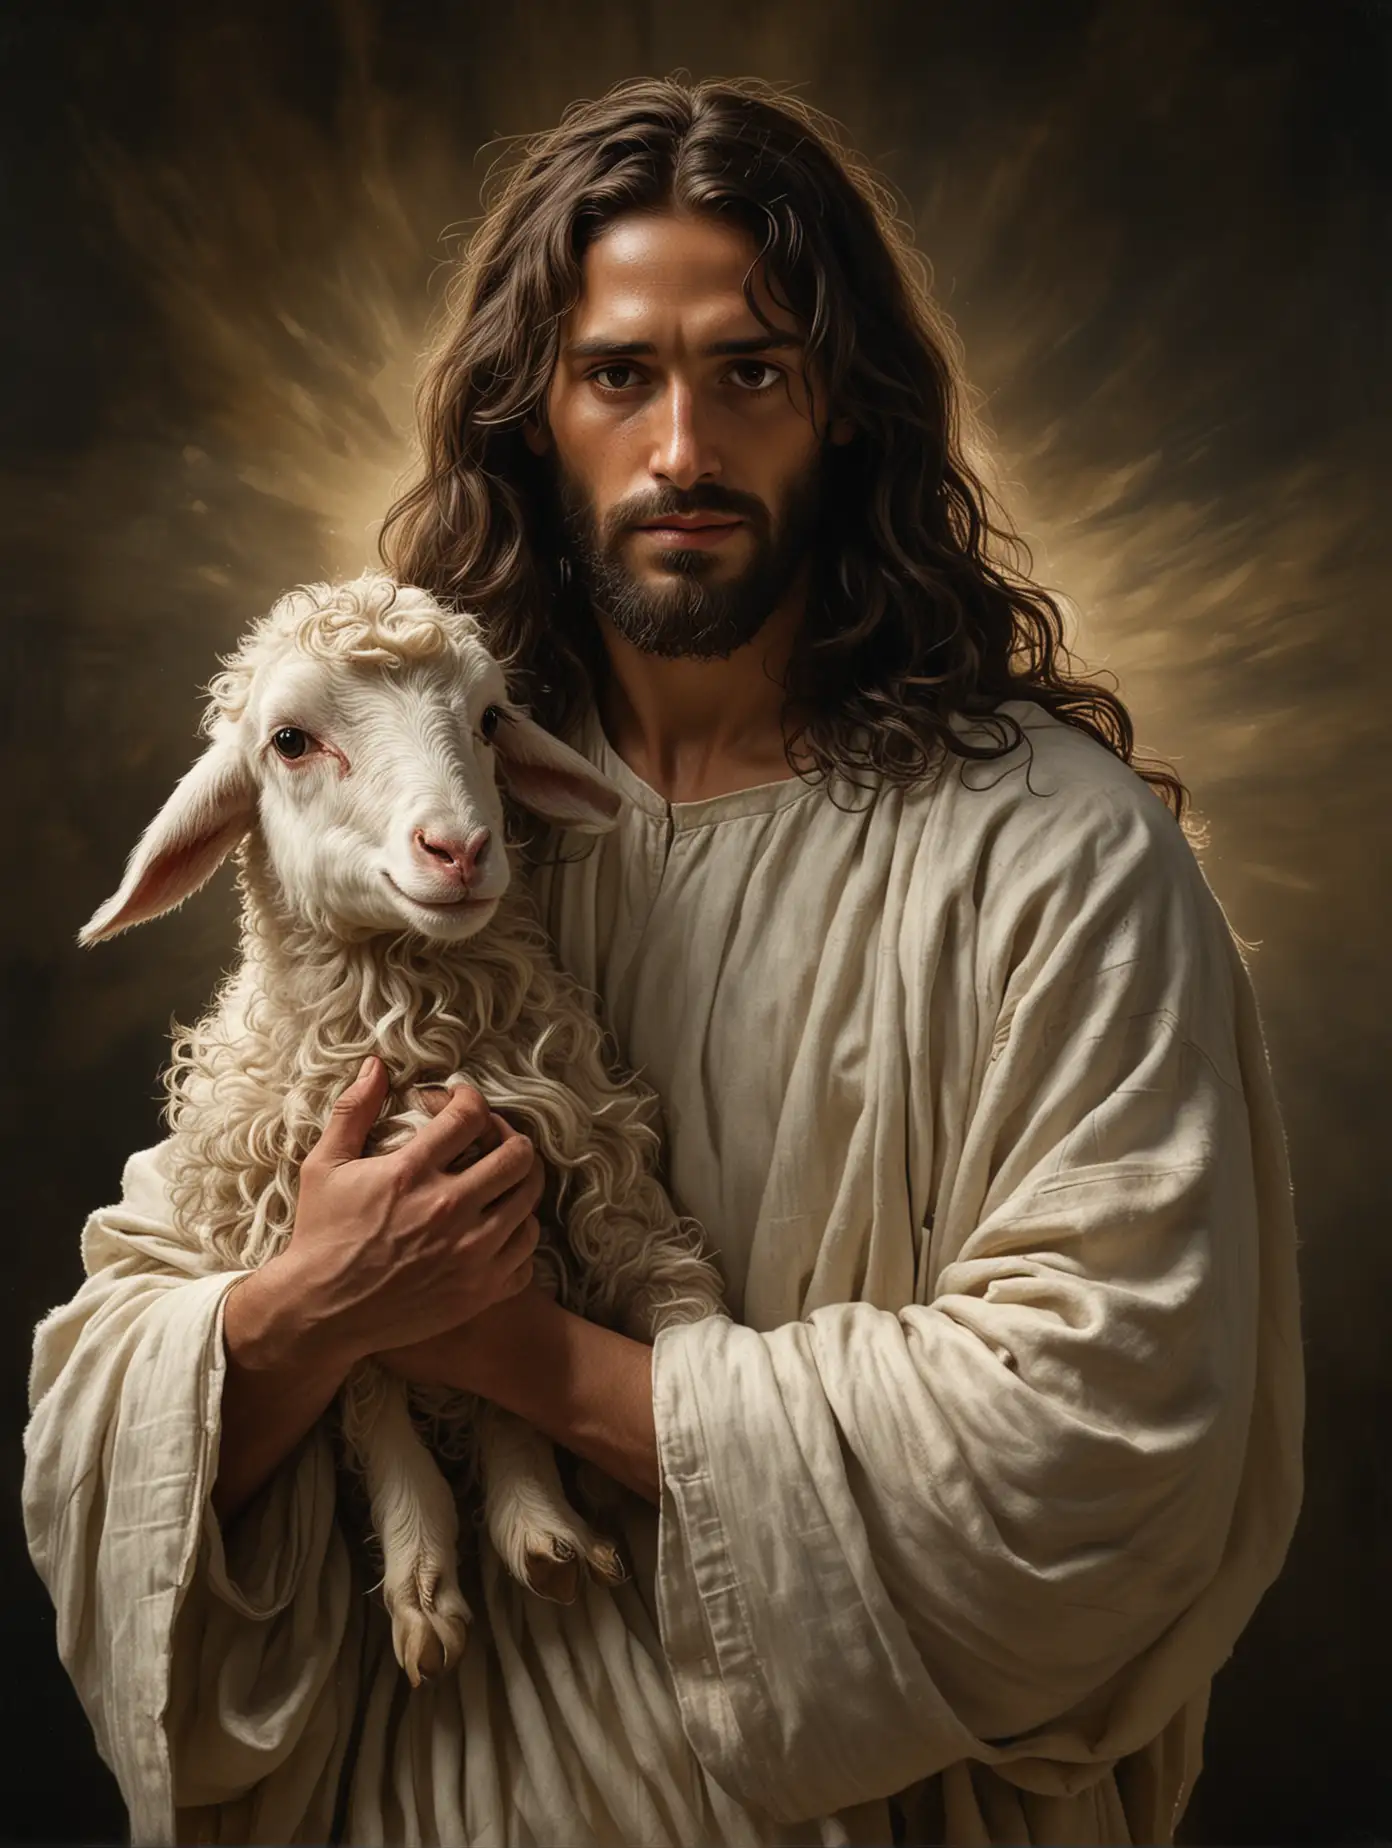 Portrait of Jesus Holding a Lamb Realistic Depiction with Dramatic Lighting